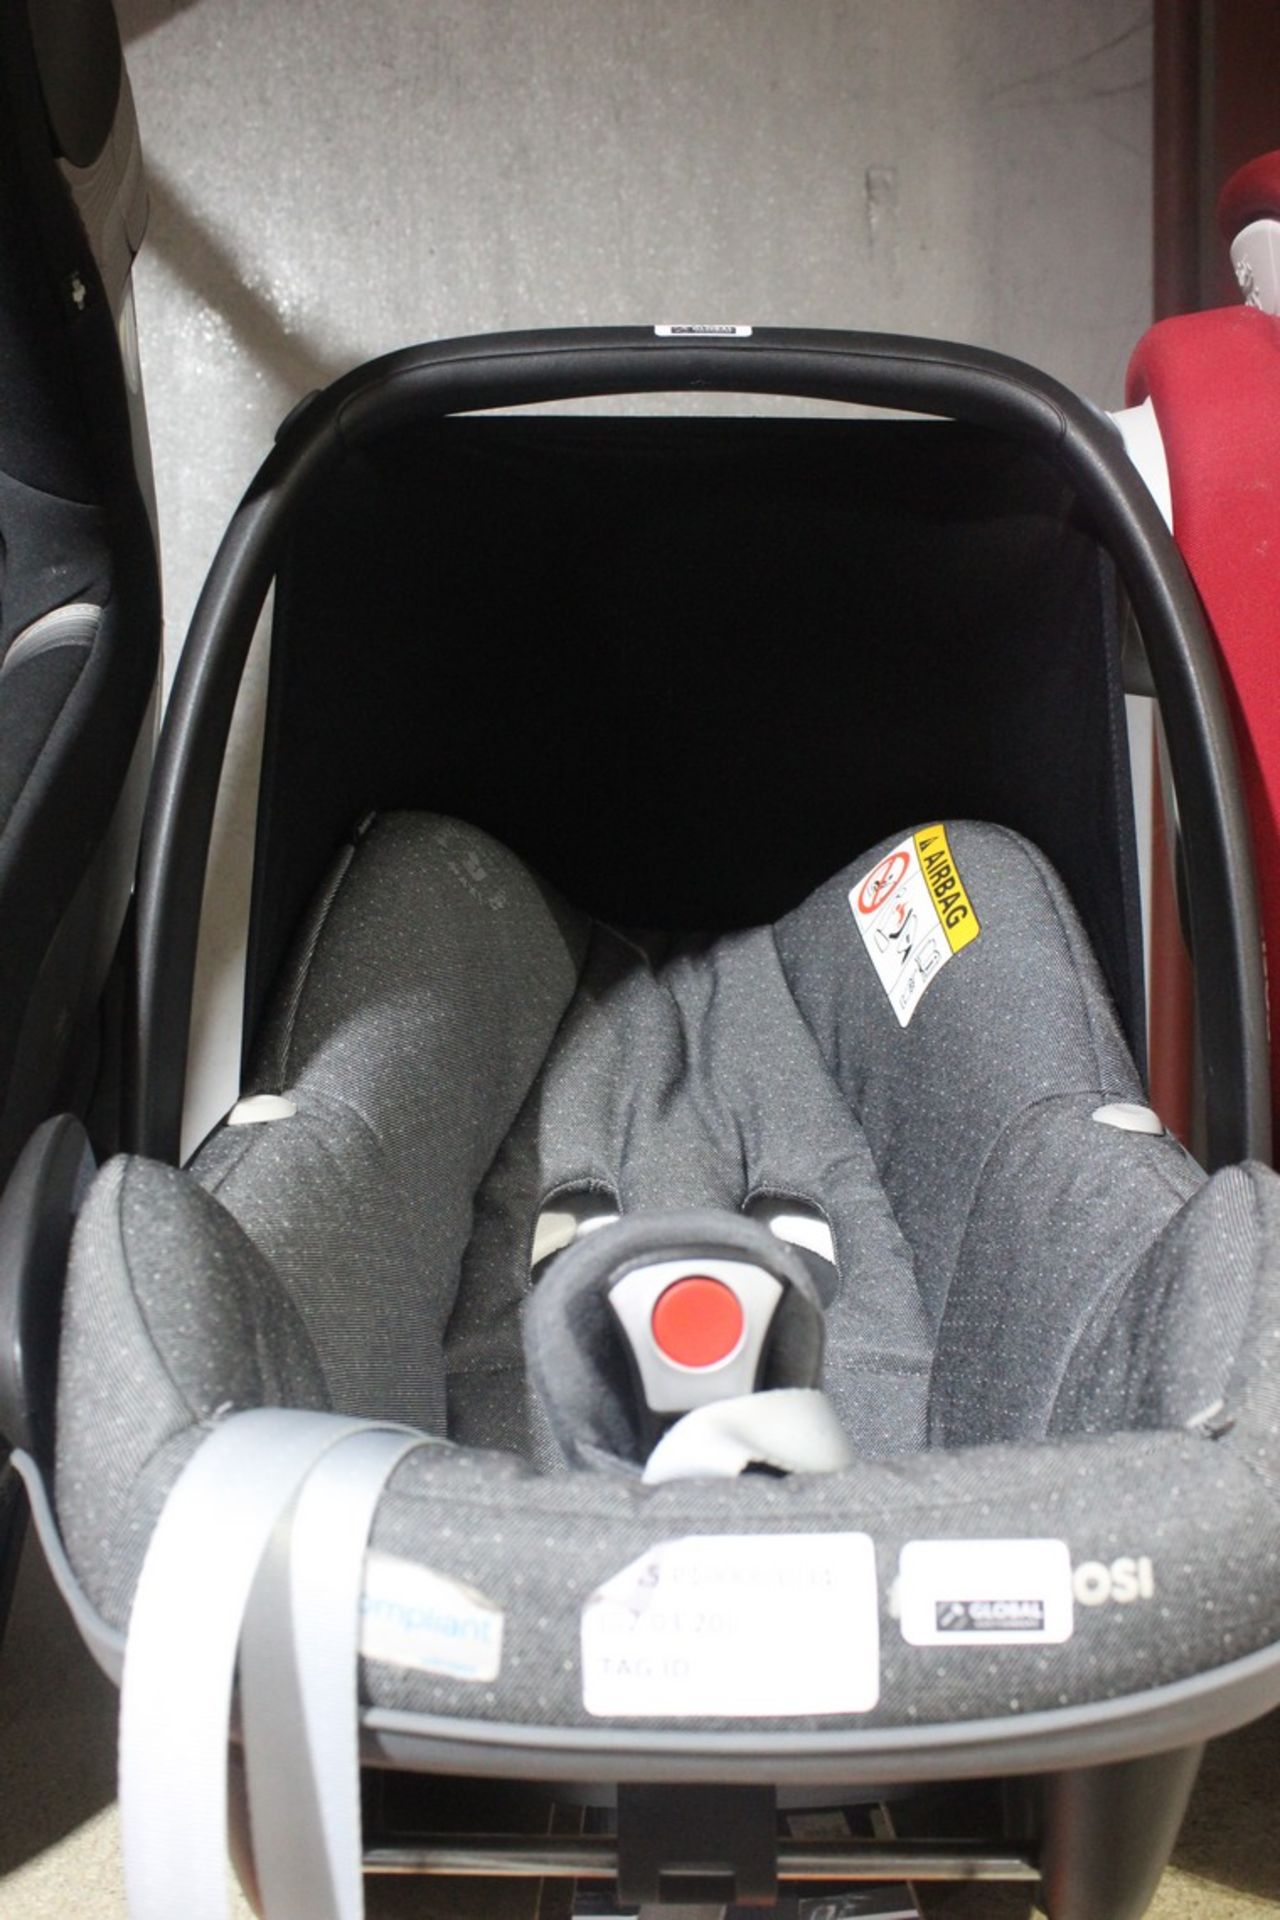 Maxi Cosy I Size Compliant in Car Safety Seat RRP £250 (RET00964656) (Appraisals Available Upon